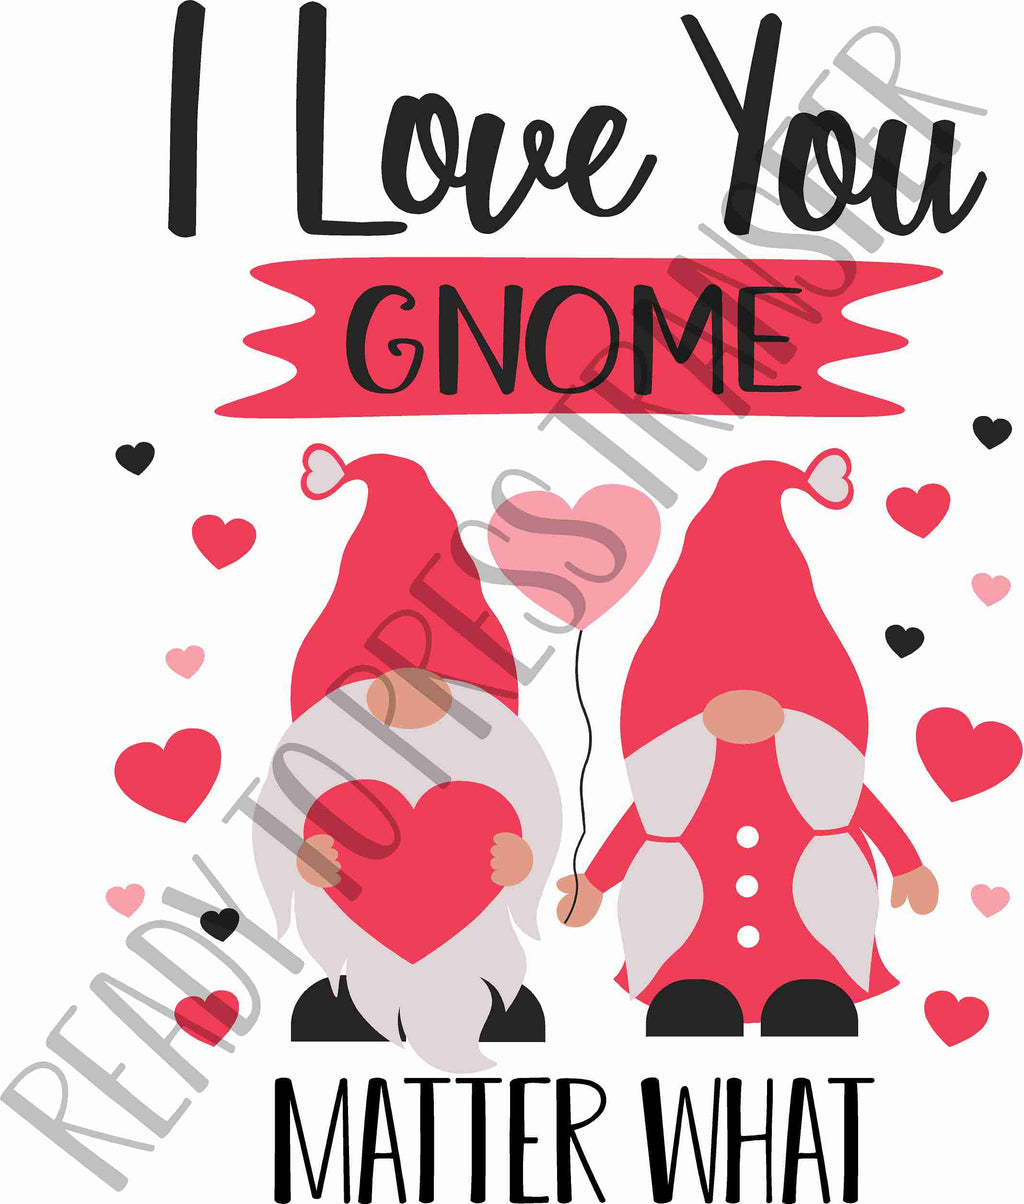 I Love You Gnome Matter What - Valentine's Day Sublimation Transfer T113